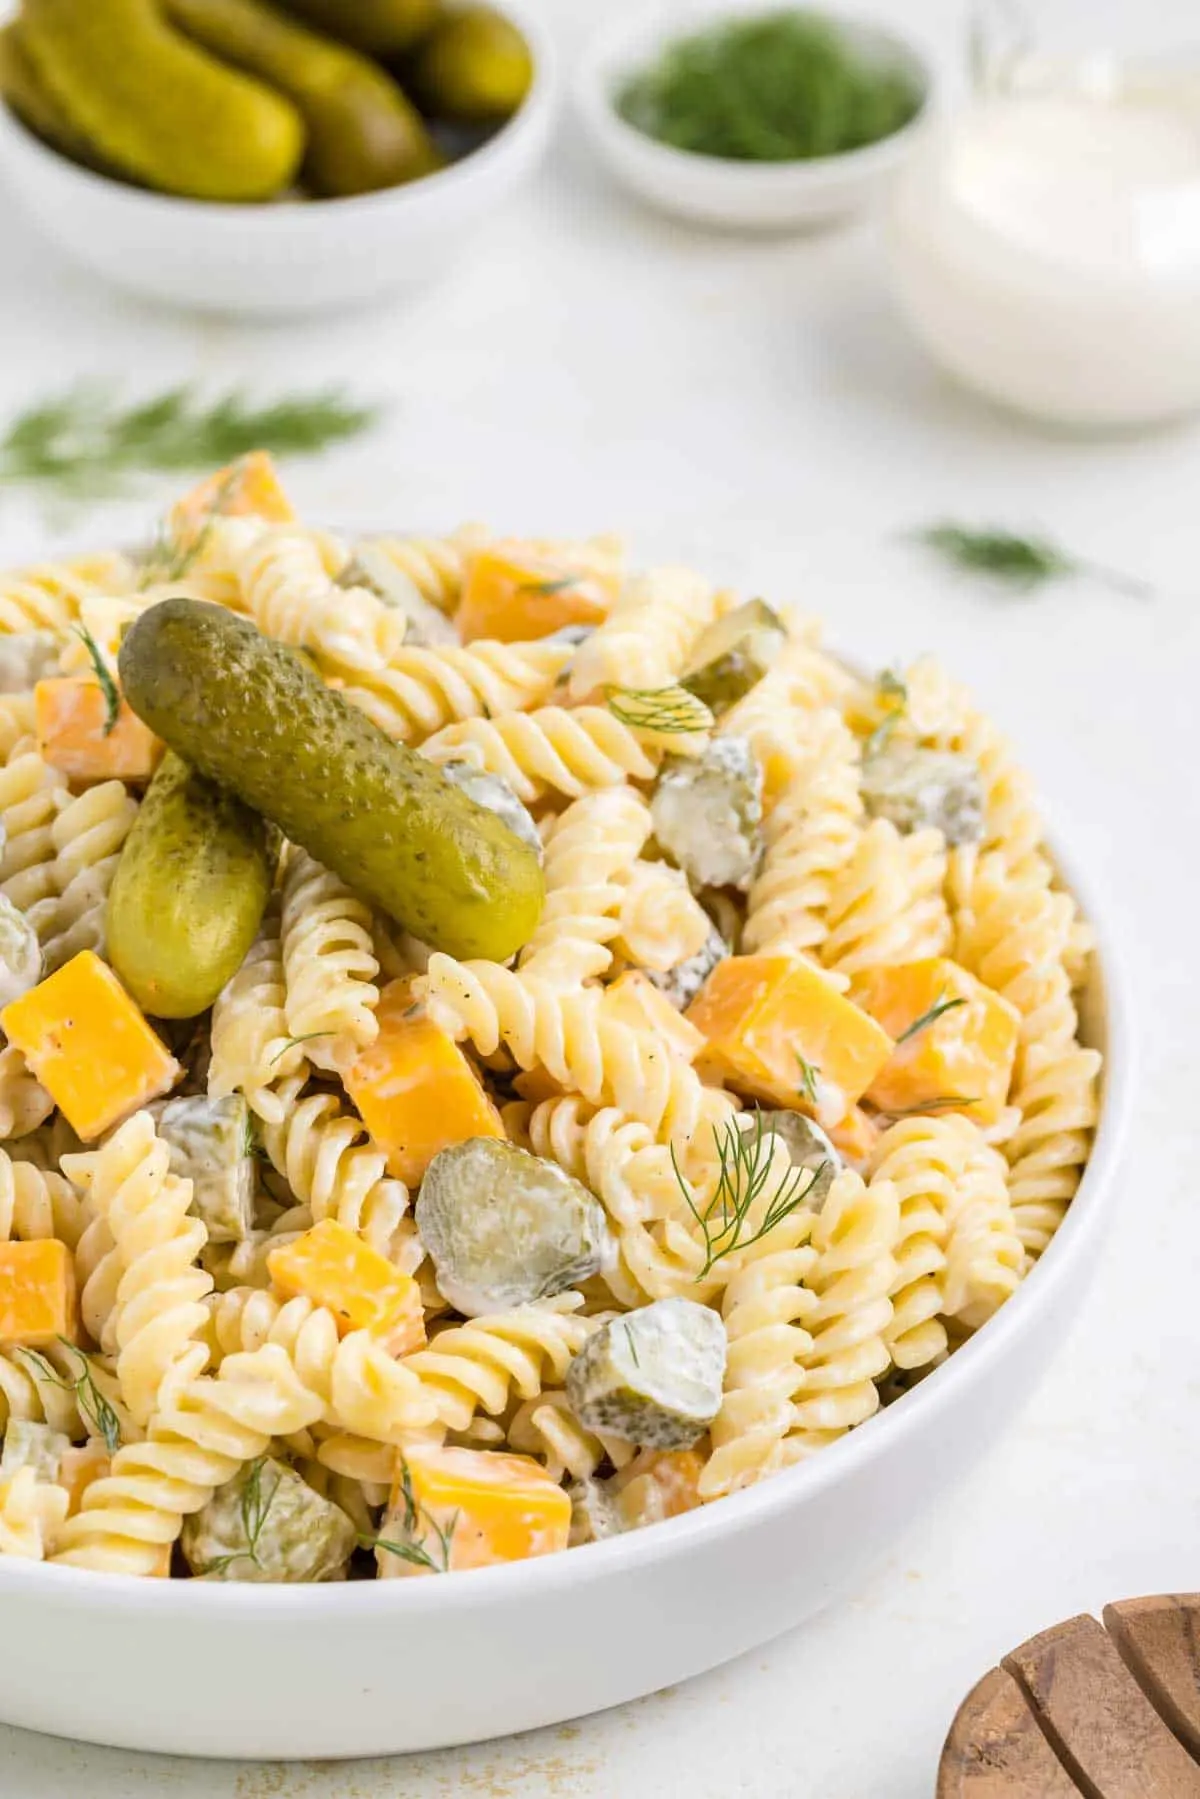 Dill Pickle Pasta Salad is a tasty cold side dish recipe made with rotini noodles and loaded with cheddar cheese, dill pickles and fresh dill all tossed in a mayo, sour cream and pickle juice dressing.